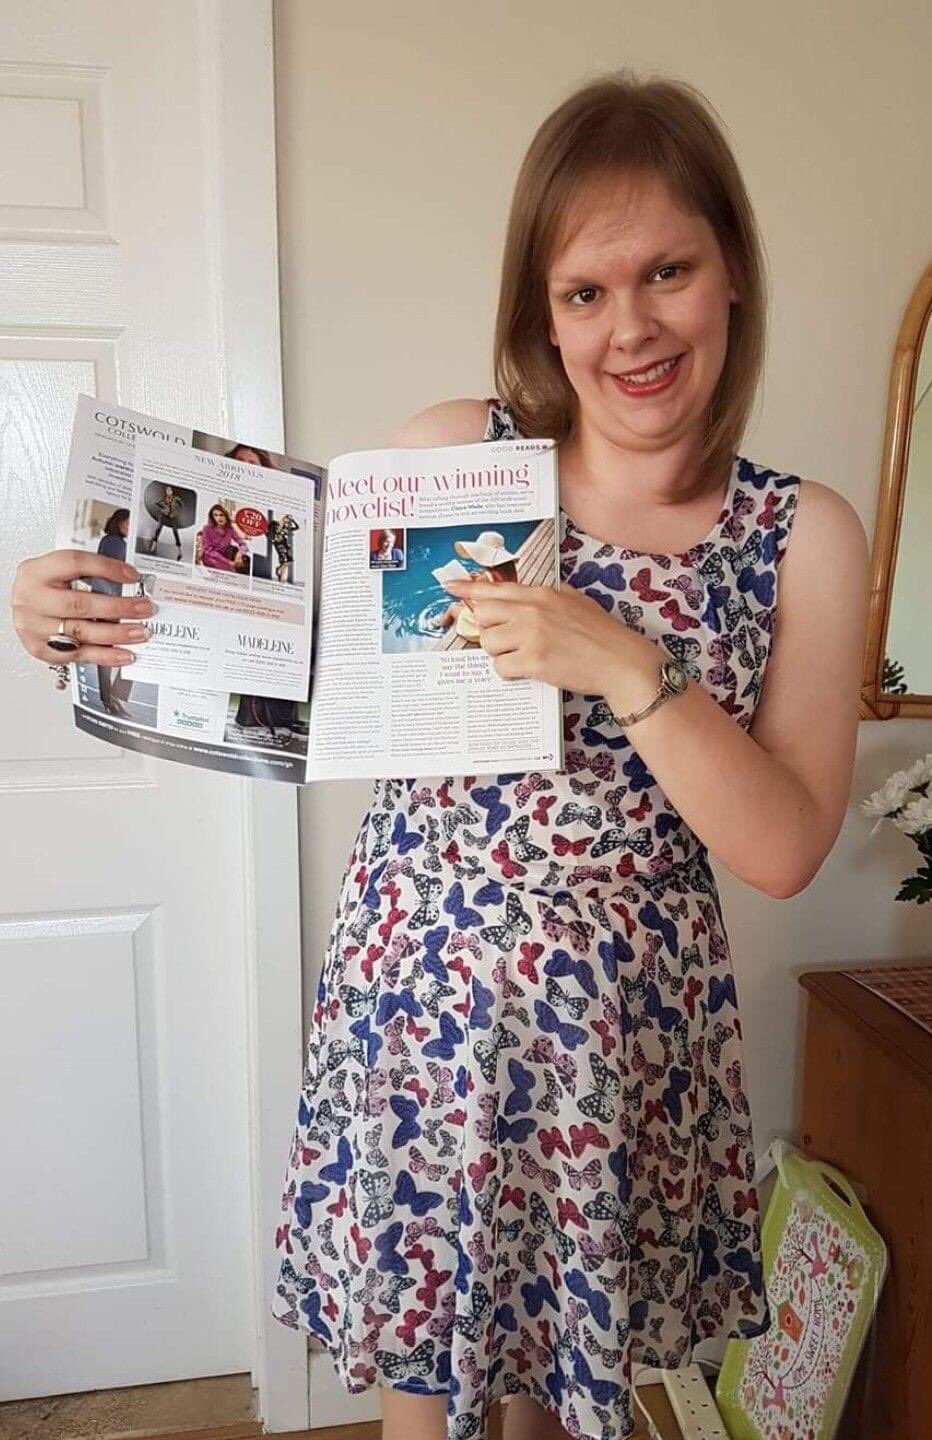 A smiling white woman with blonde hair, holding up a copy of Good Housekeeping magazine.